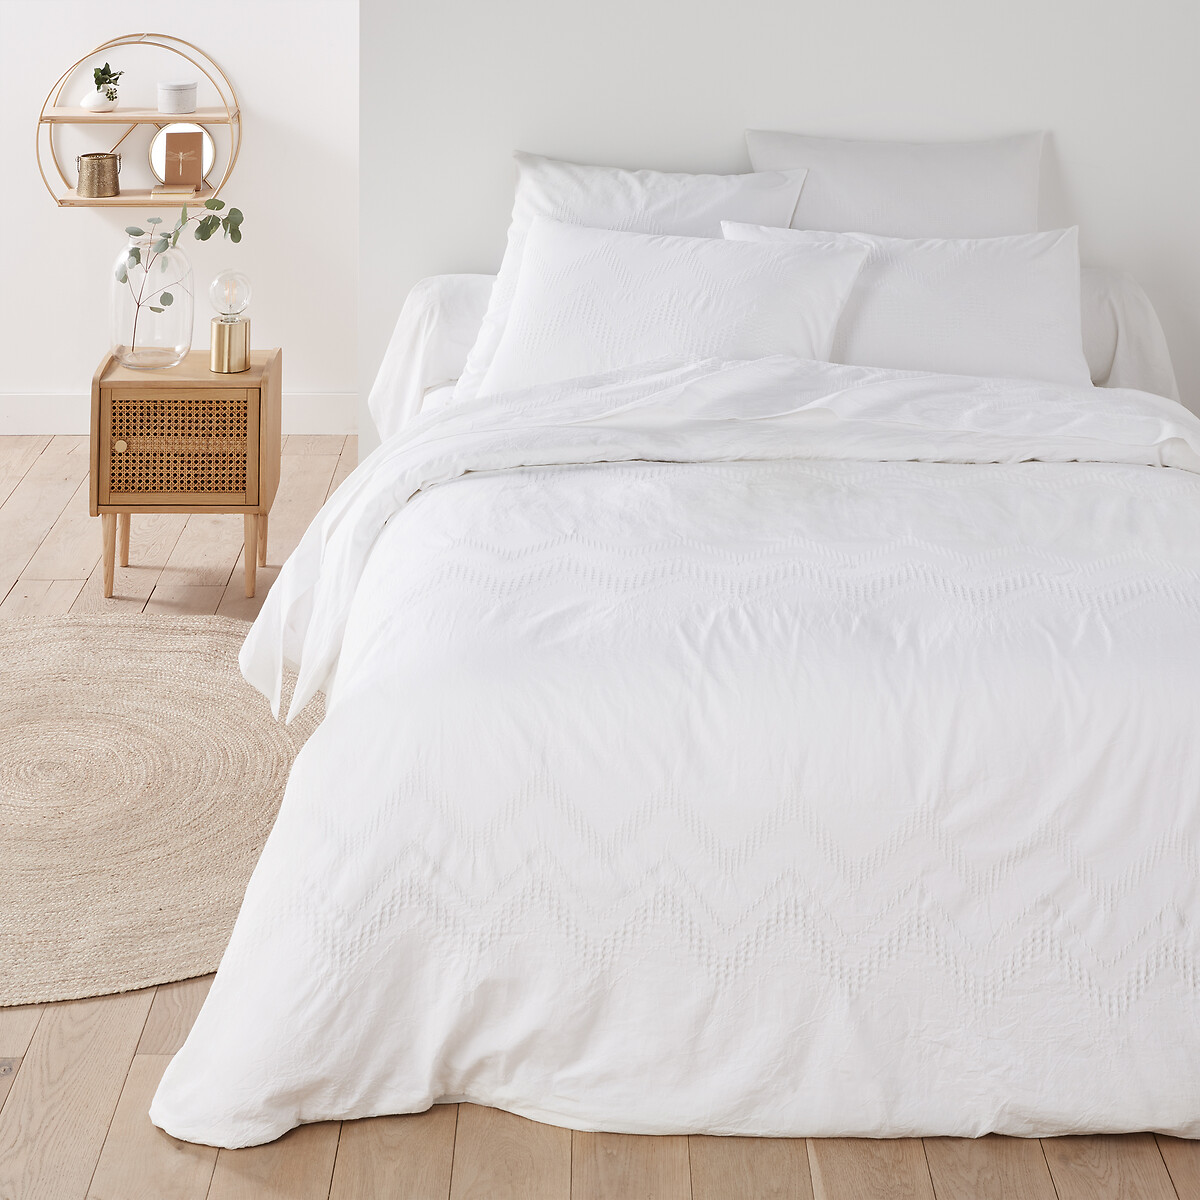 Kaessy Organic Washed Cotton Percale, Cotton Percale Duvet Cover King